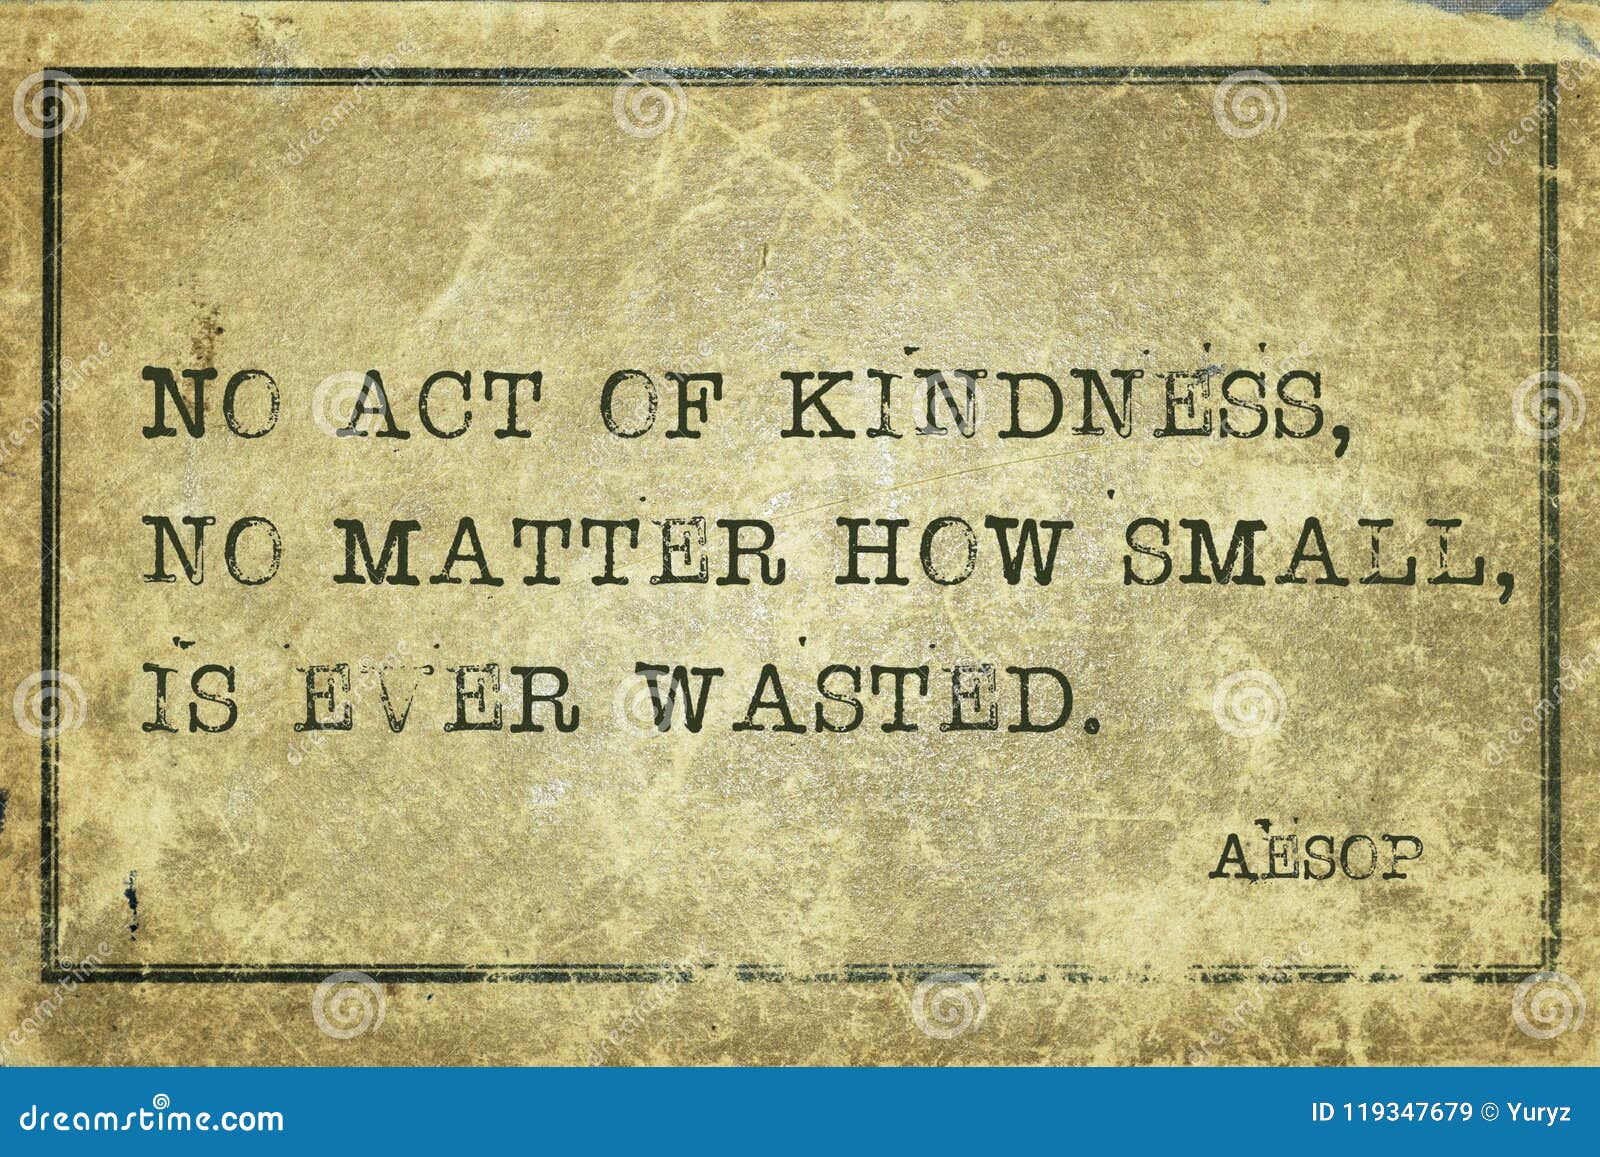 act of kindness aesop